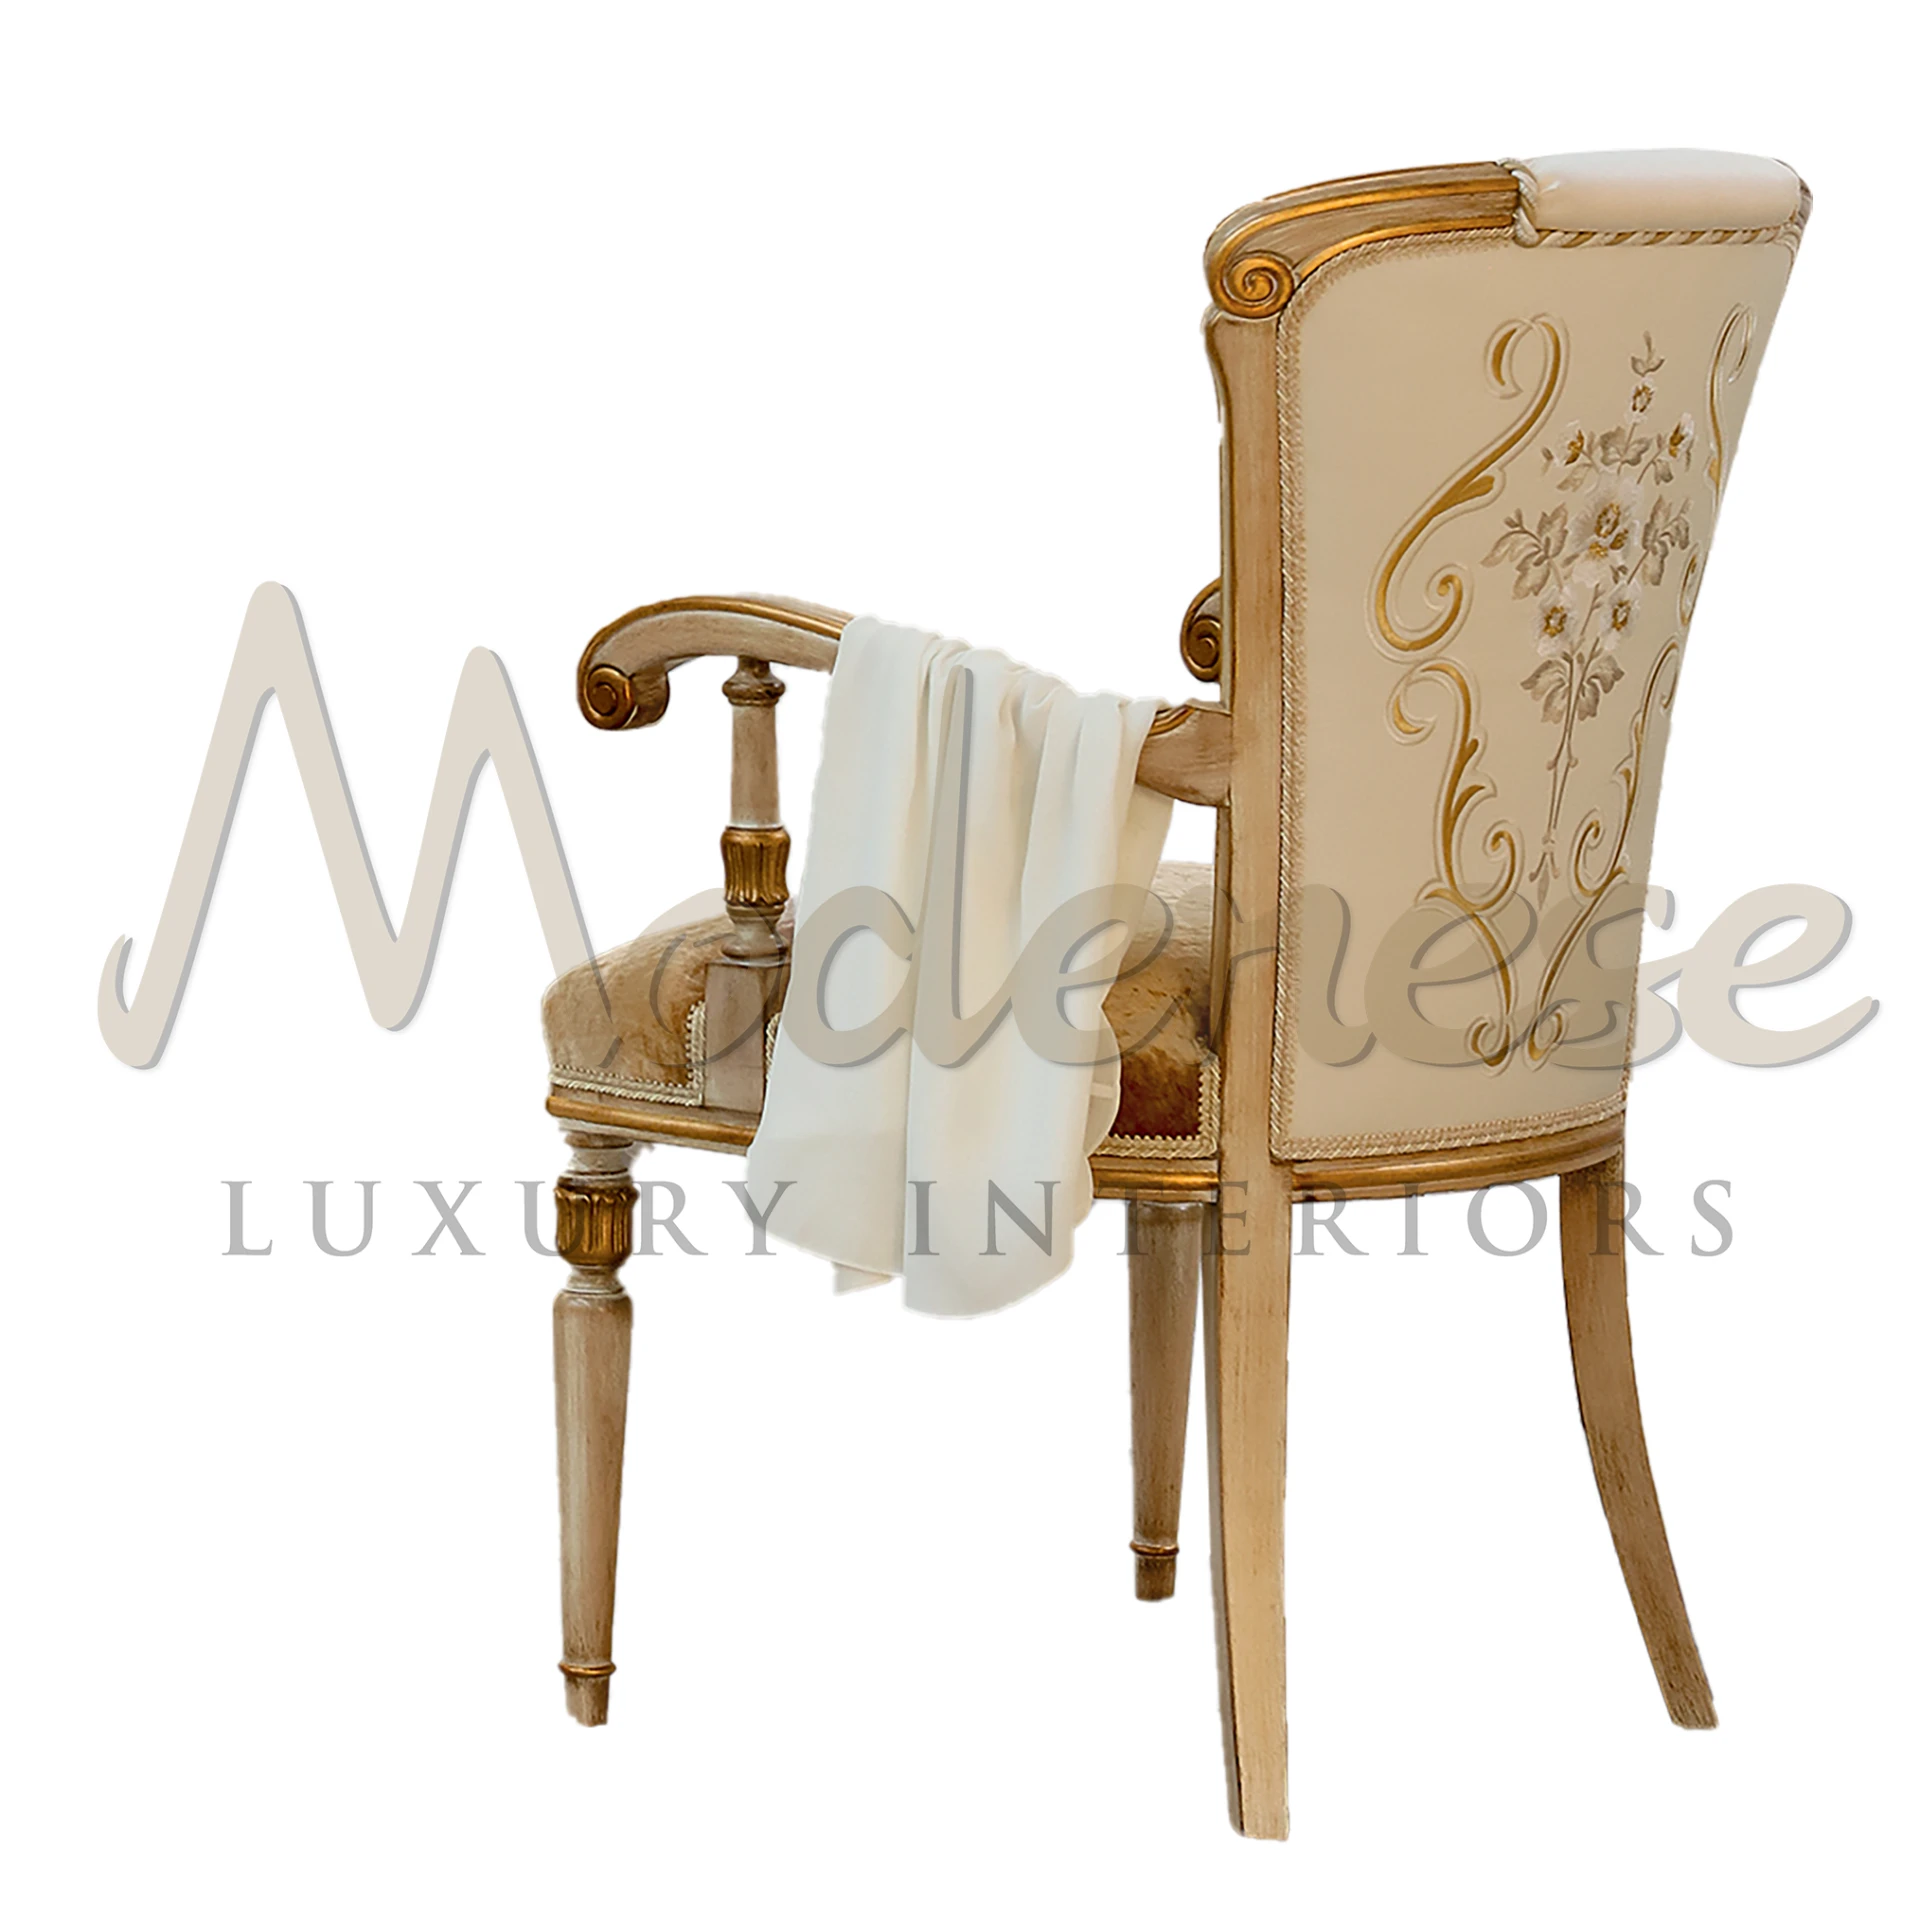 Luxurious hand carved chair with armrests with intricate detailing and golden floral pattern